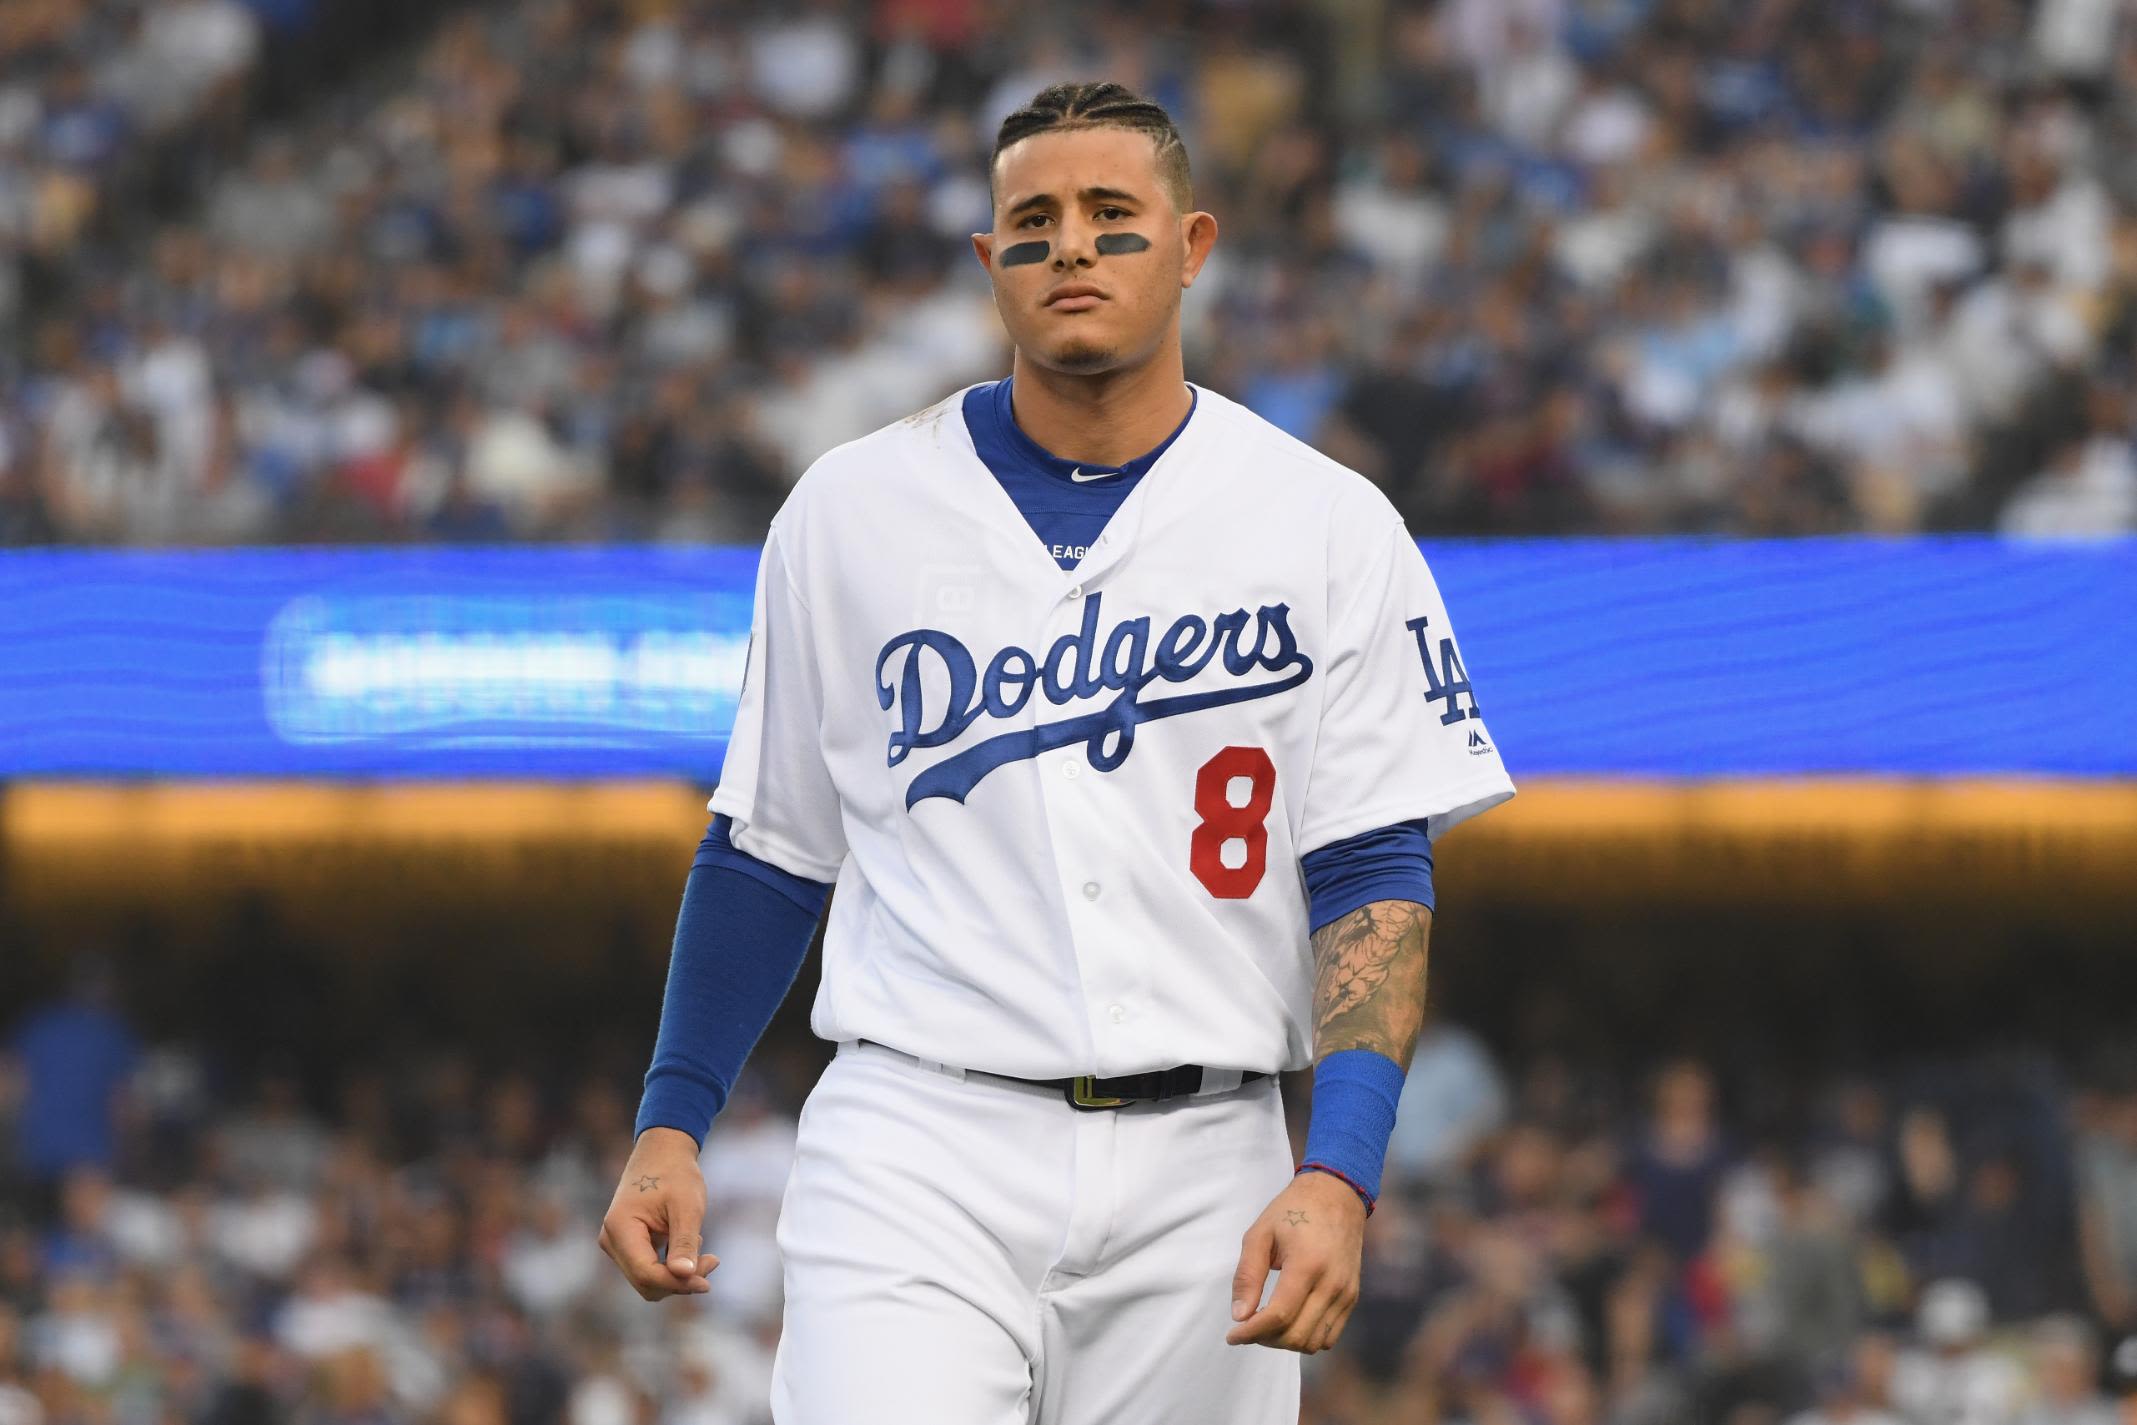 Machado's dad says Dodgers have made offer